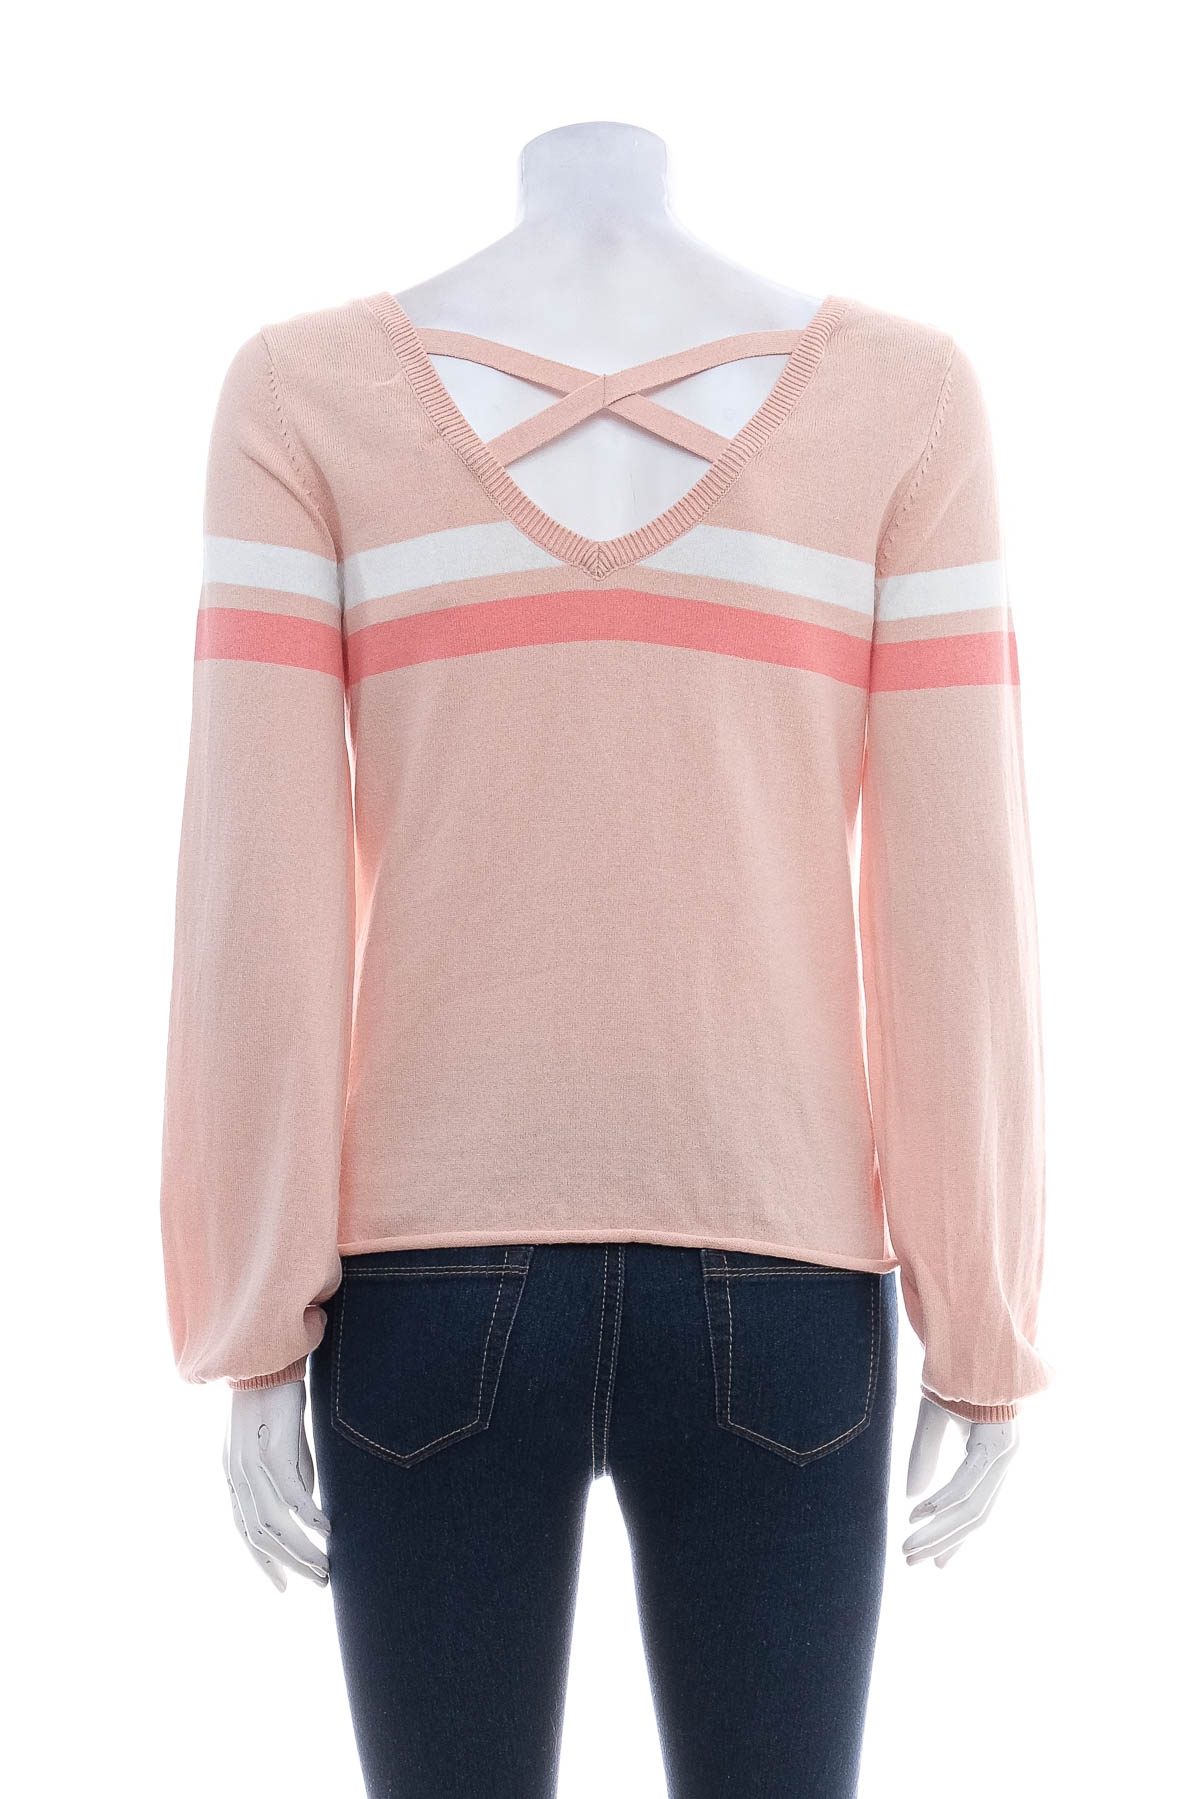 Sweaters for Girl - H&M - 1